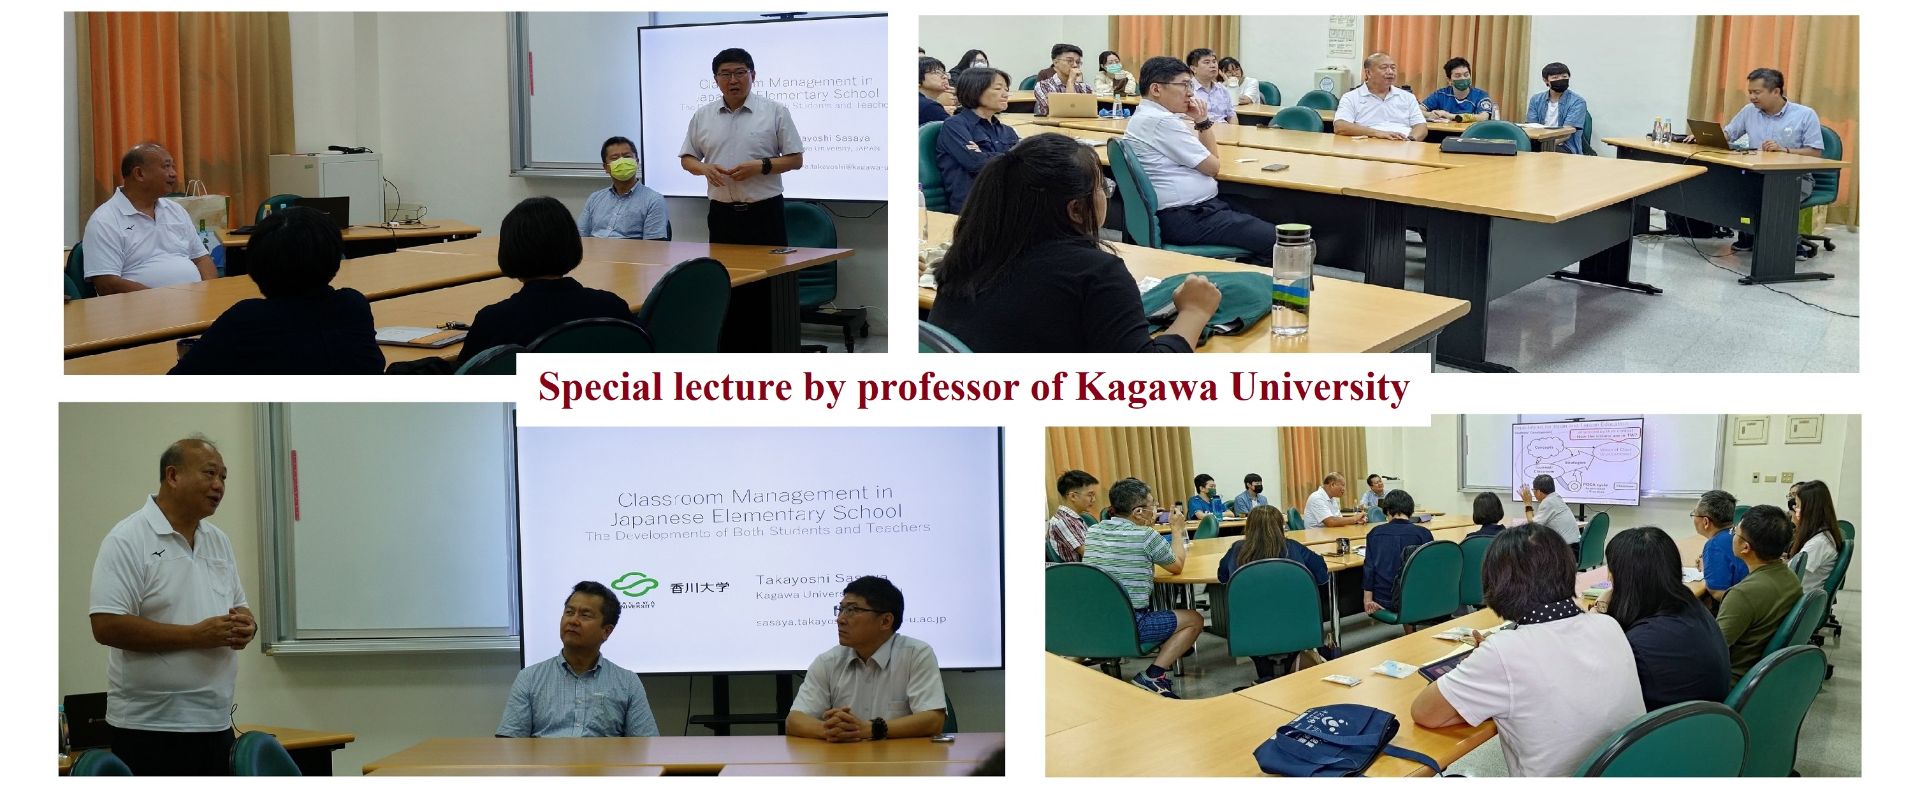 Special lecture by professor of Kagawa University